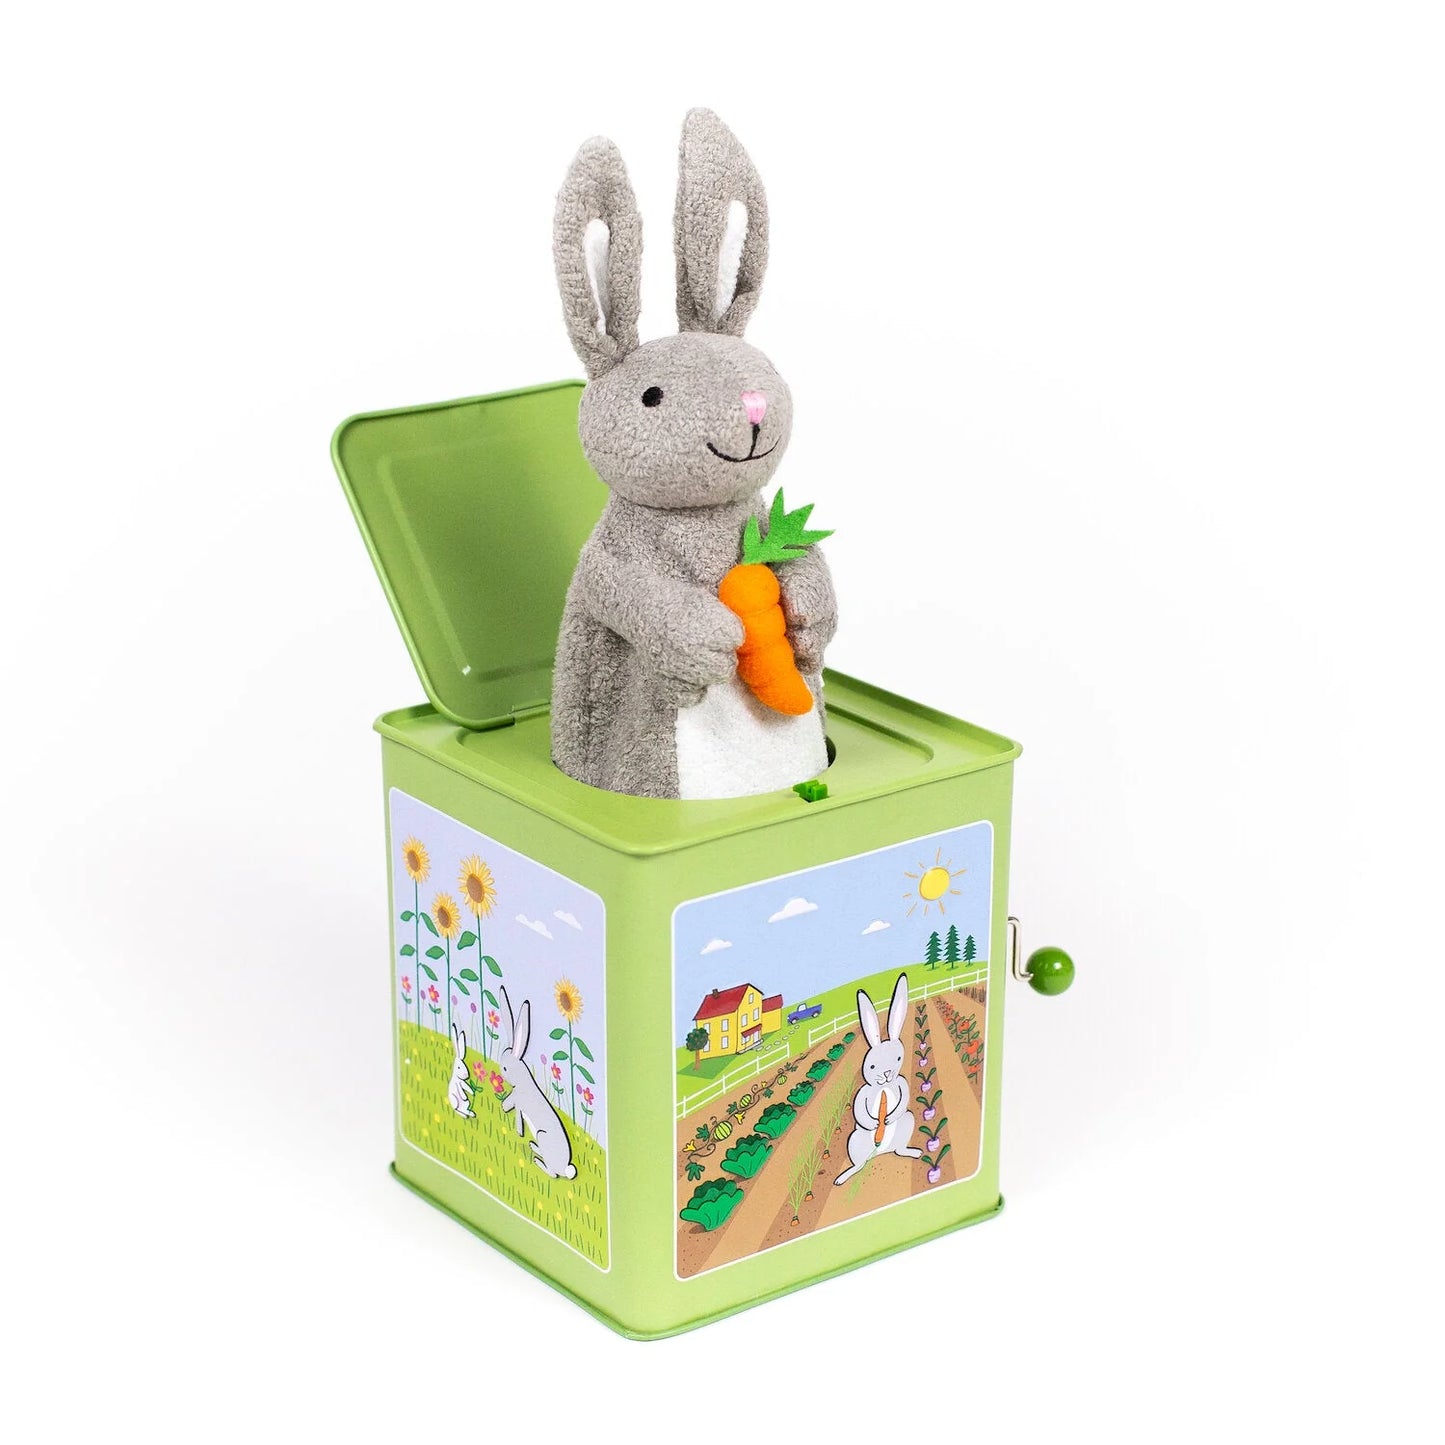 Jack the Rabbit Jack-in-the-Box